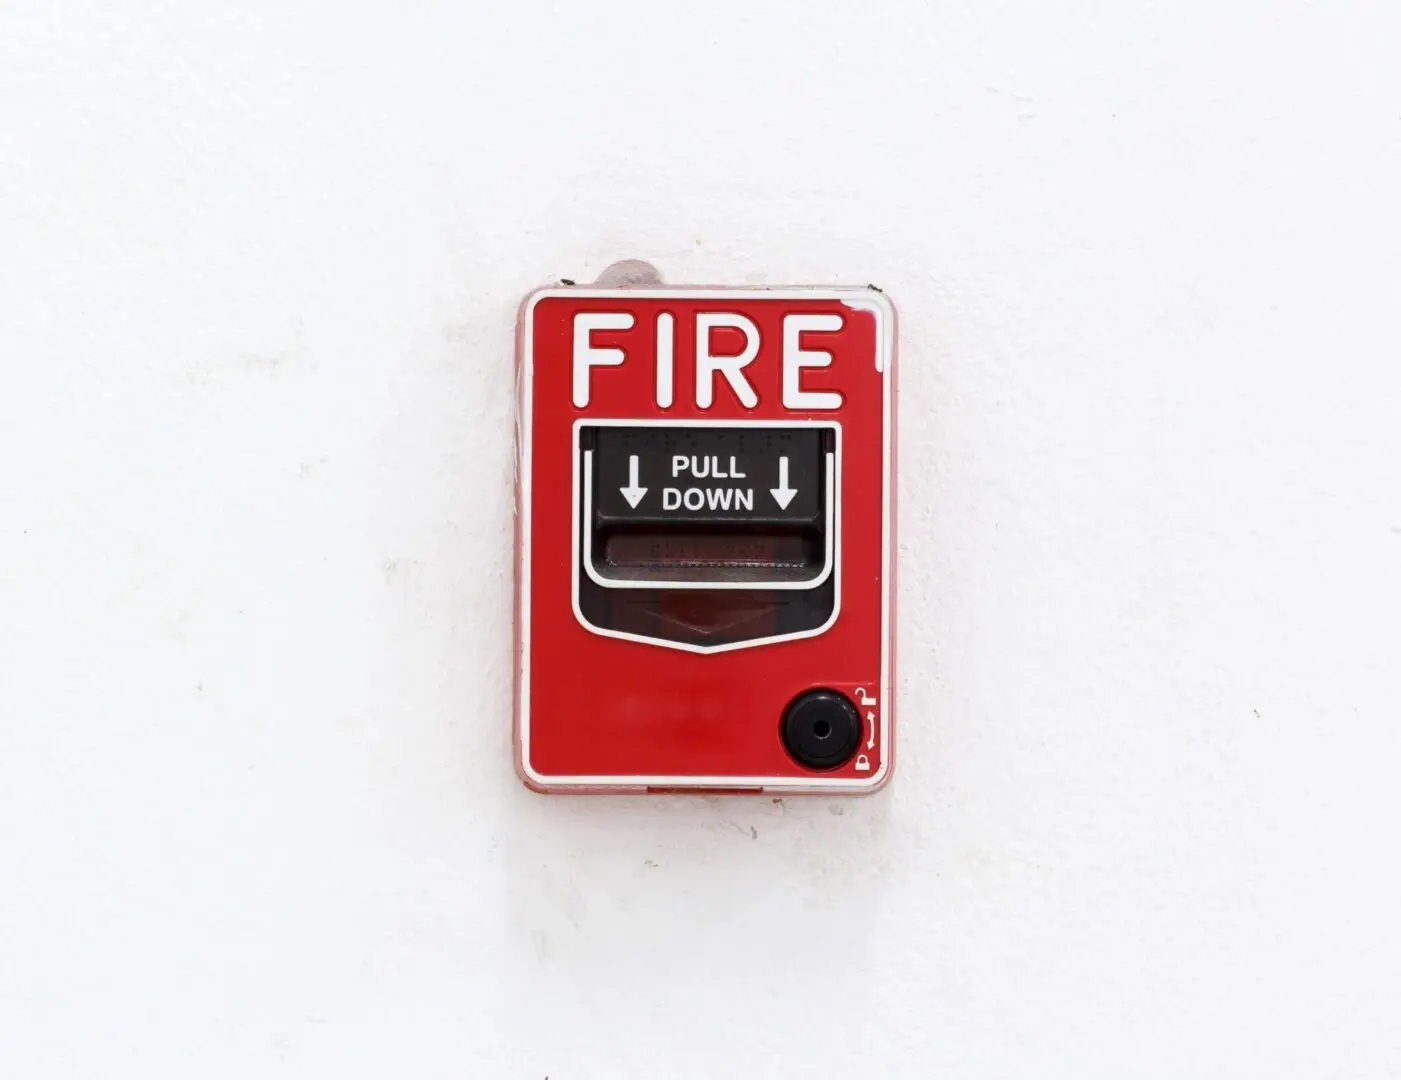 A fire alarm on the wall of a building.